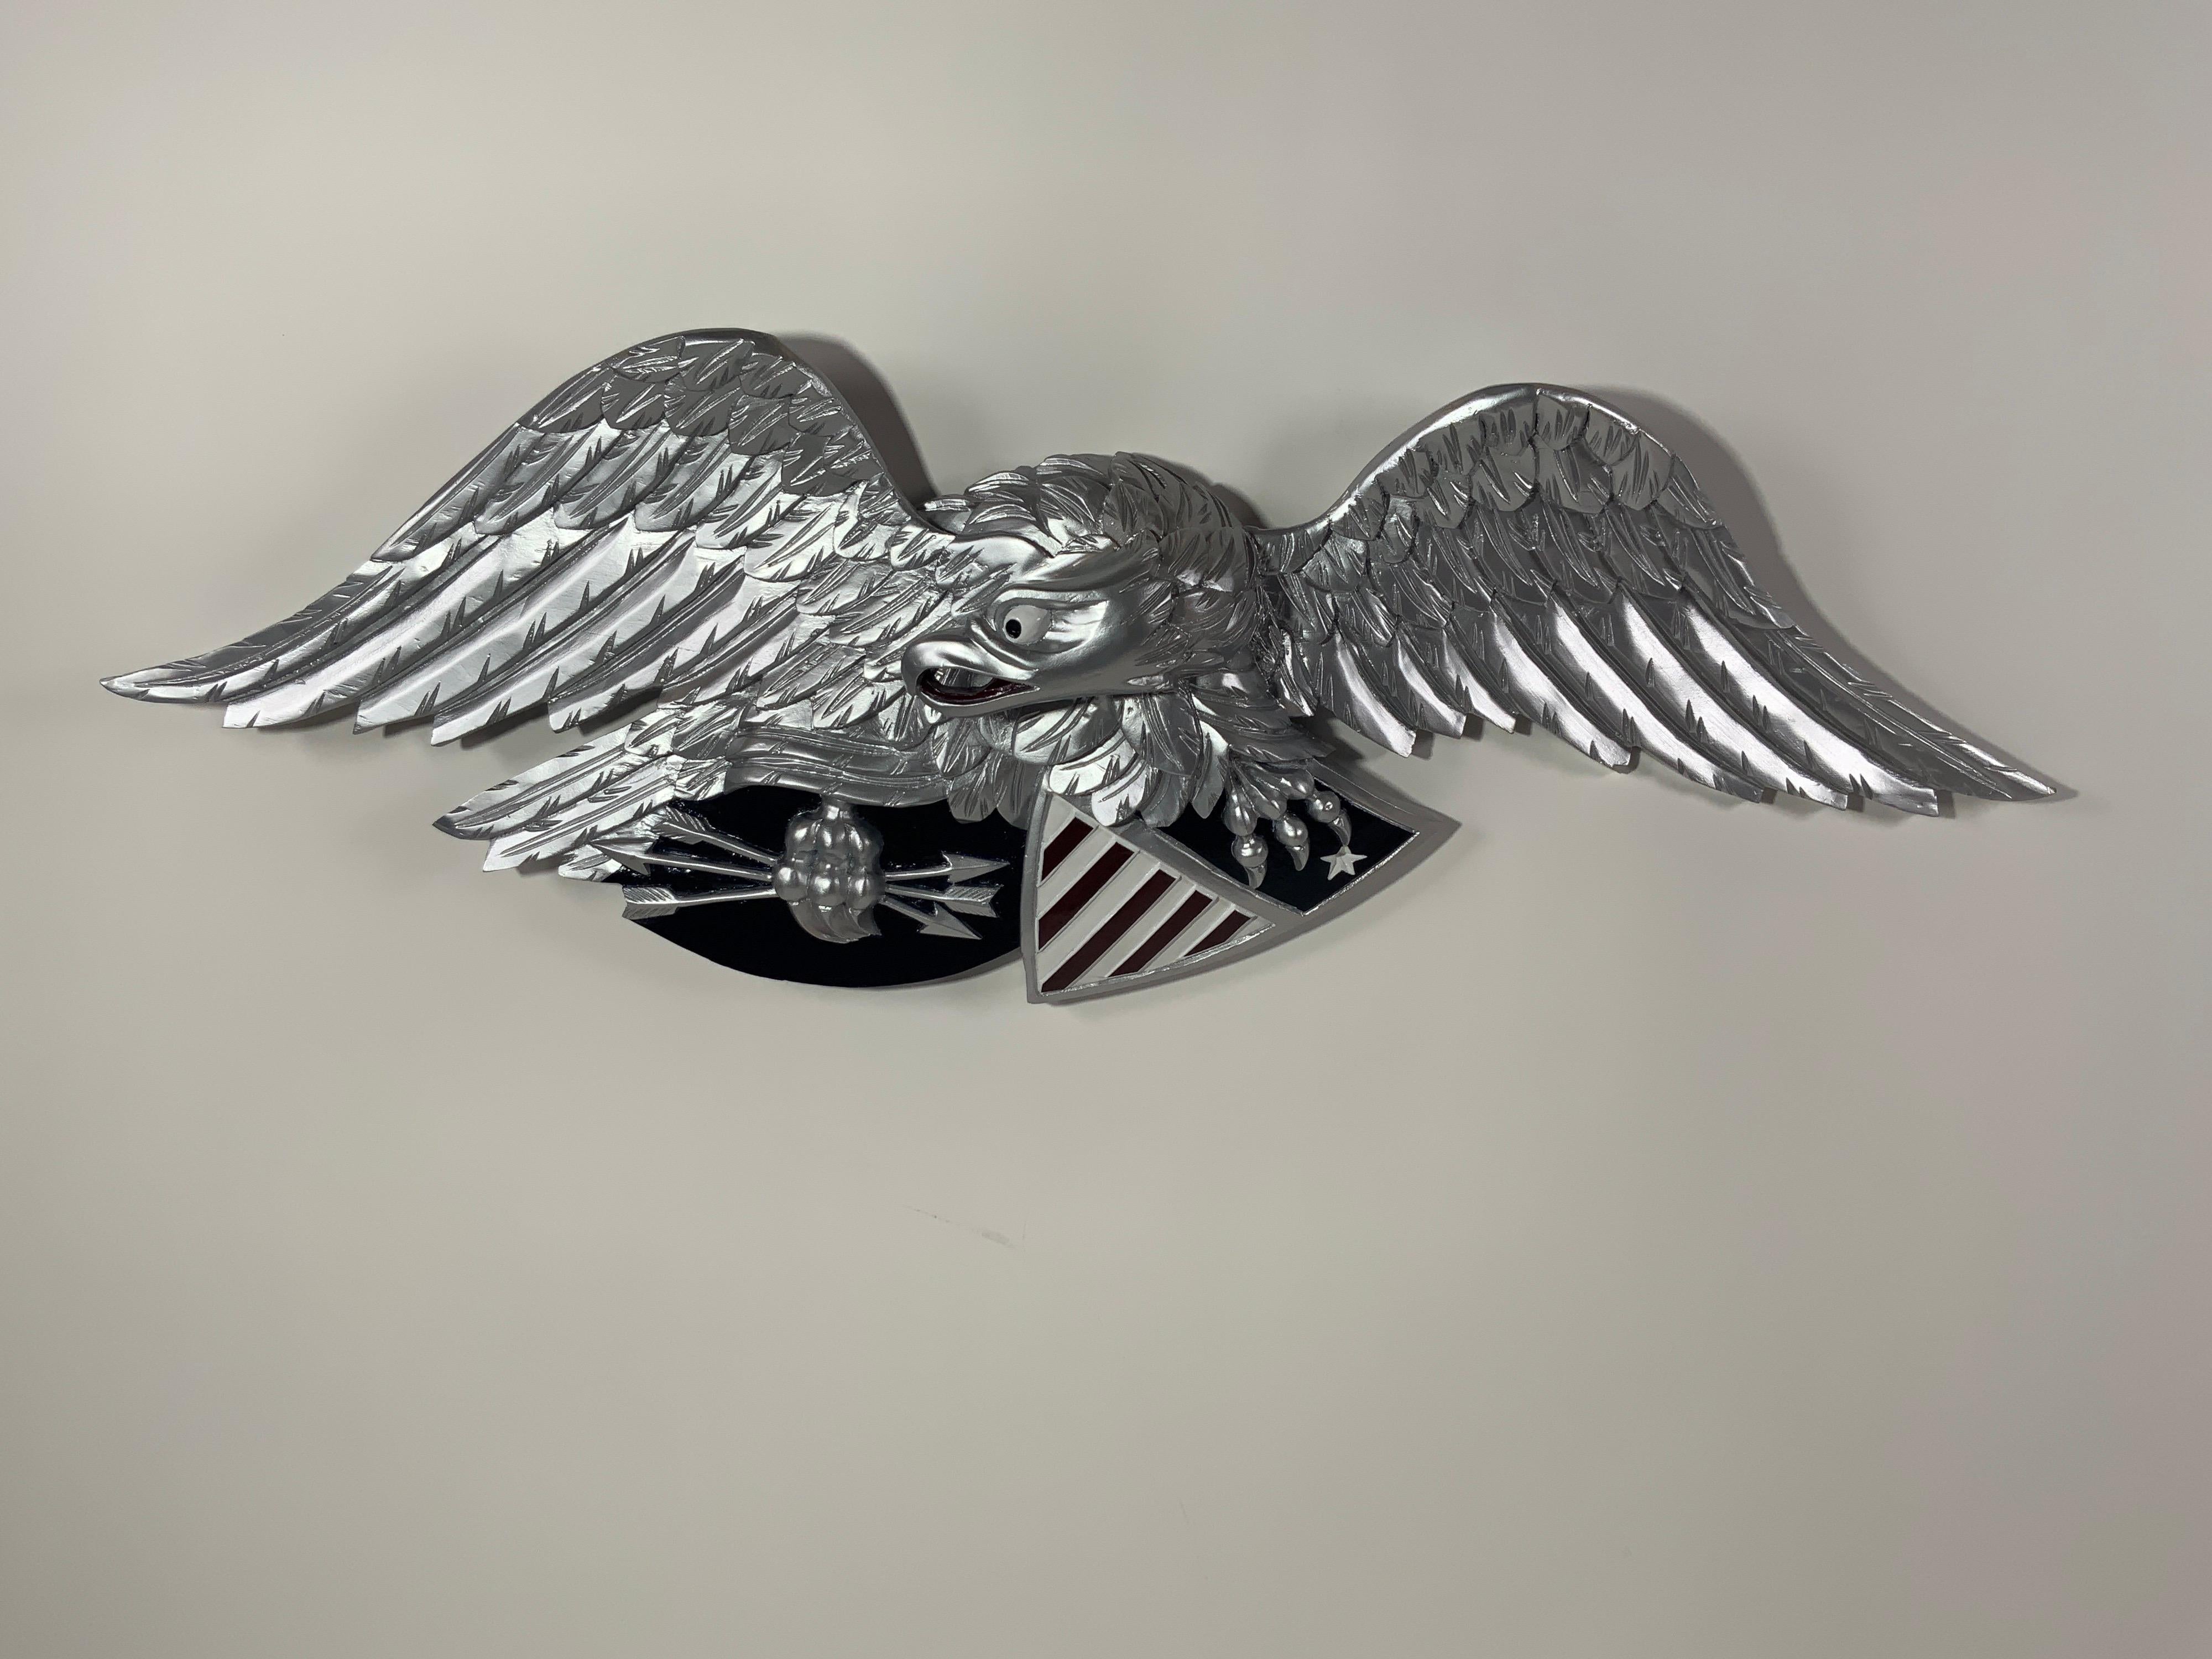 Finely carved American eagle with bright silver finish. Eagle is shown clutching arrows and a patriotic shield. Shield is painted red, white and blue.

Overall dimensions: 13